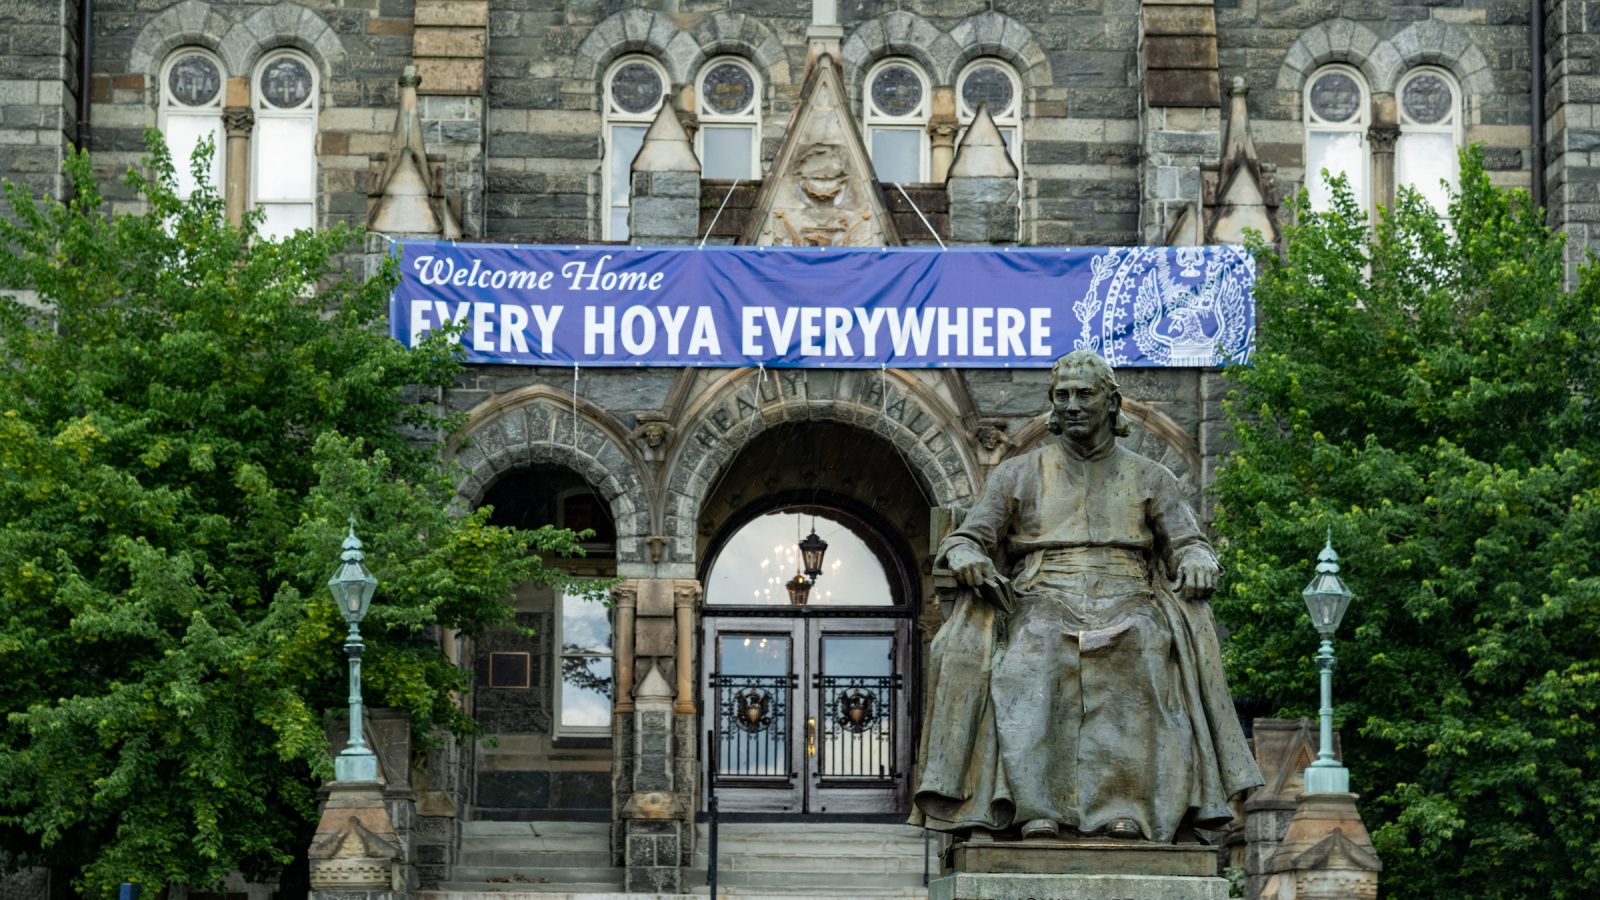 John Carroll statue in front of Healy Hall with the sign 